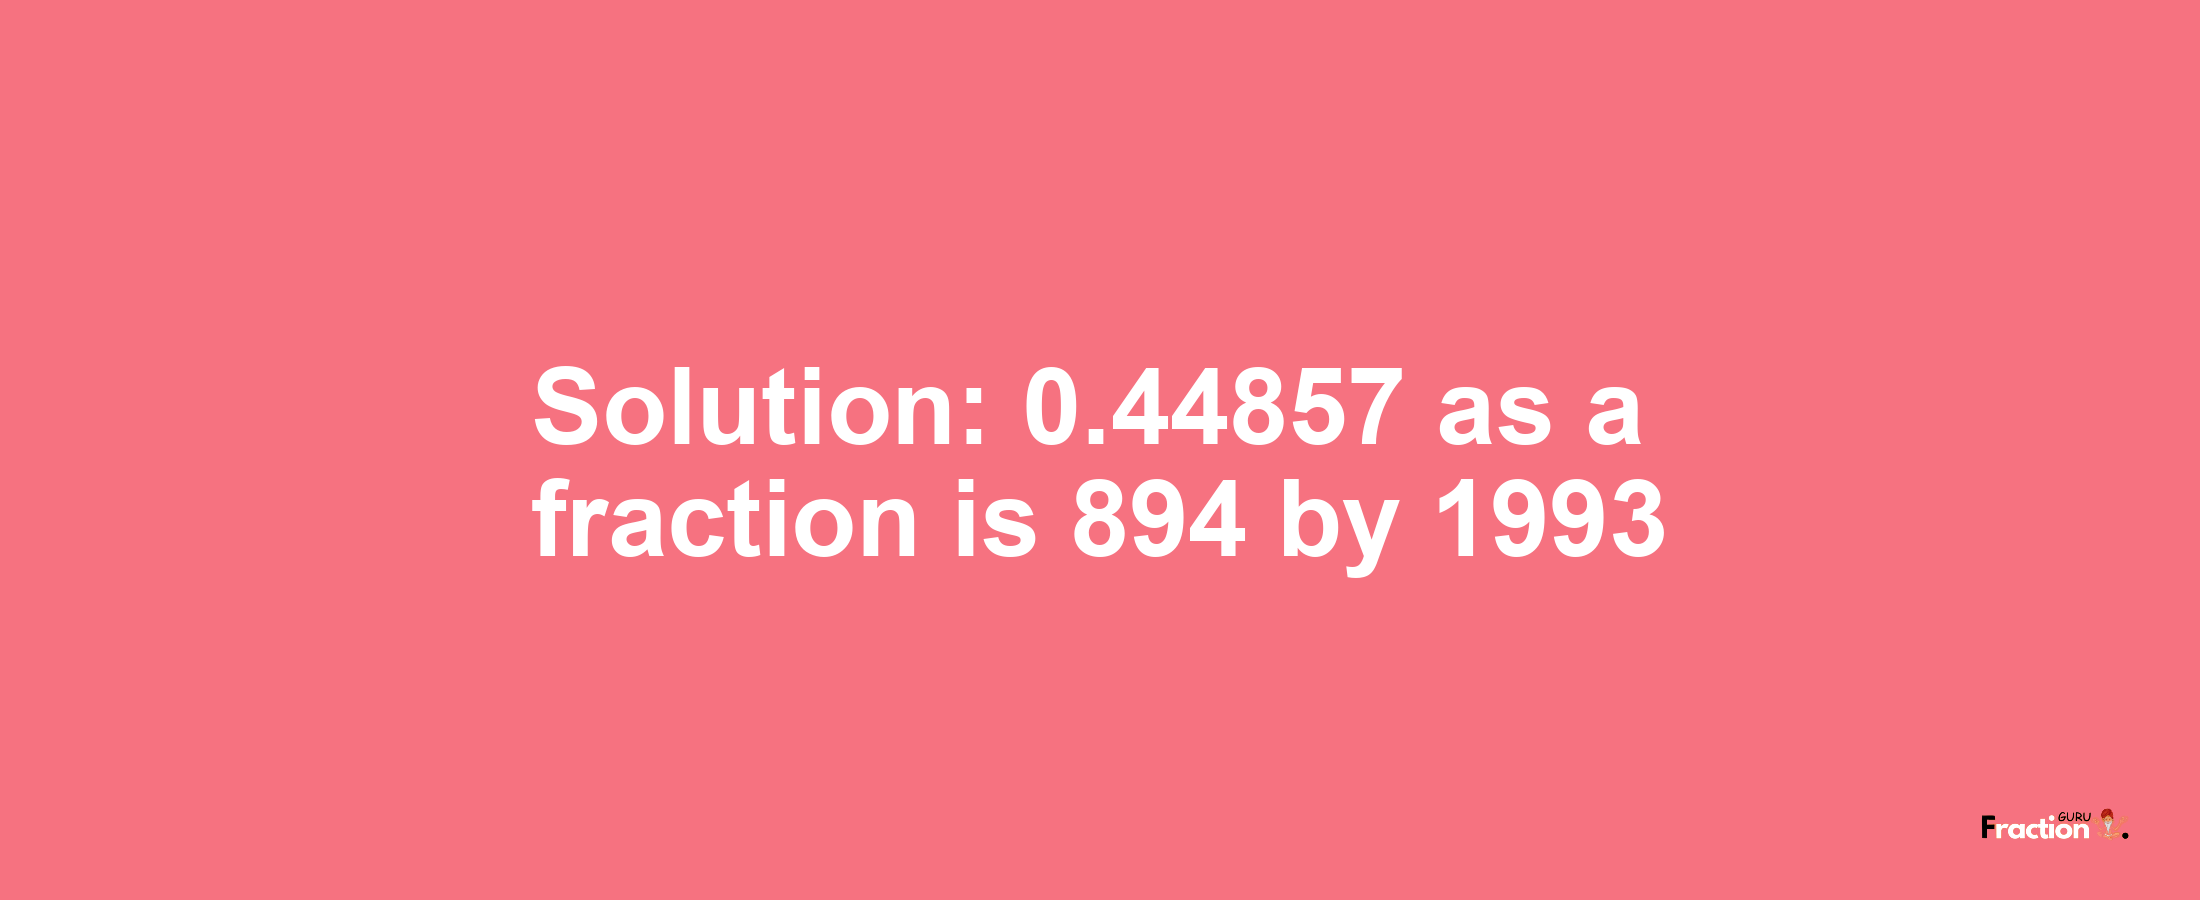 Solution:0.44857 as a fraction is 894/1993